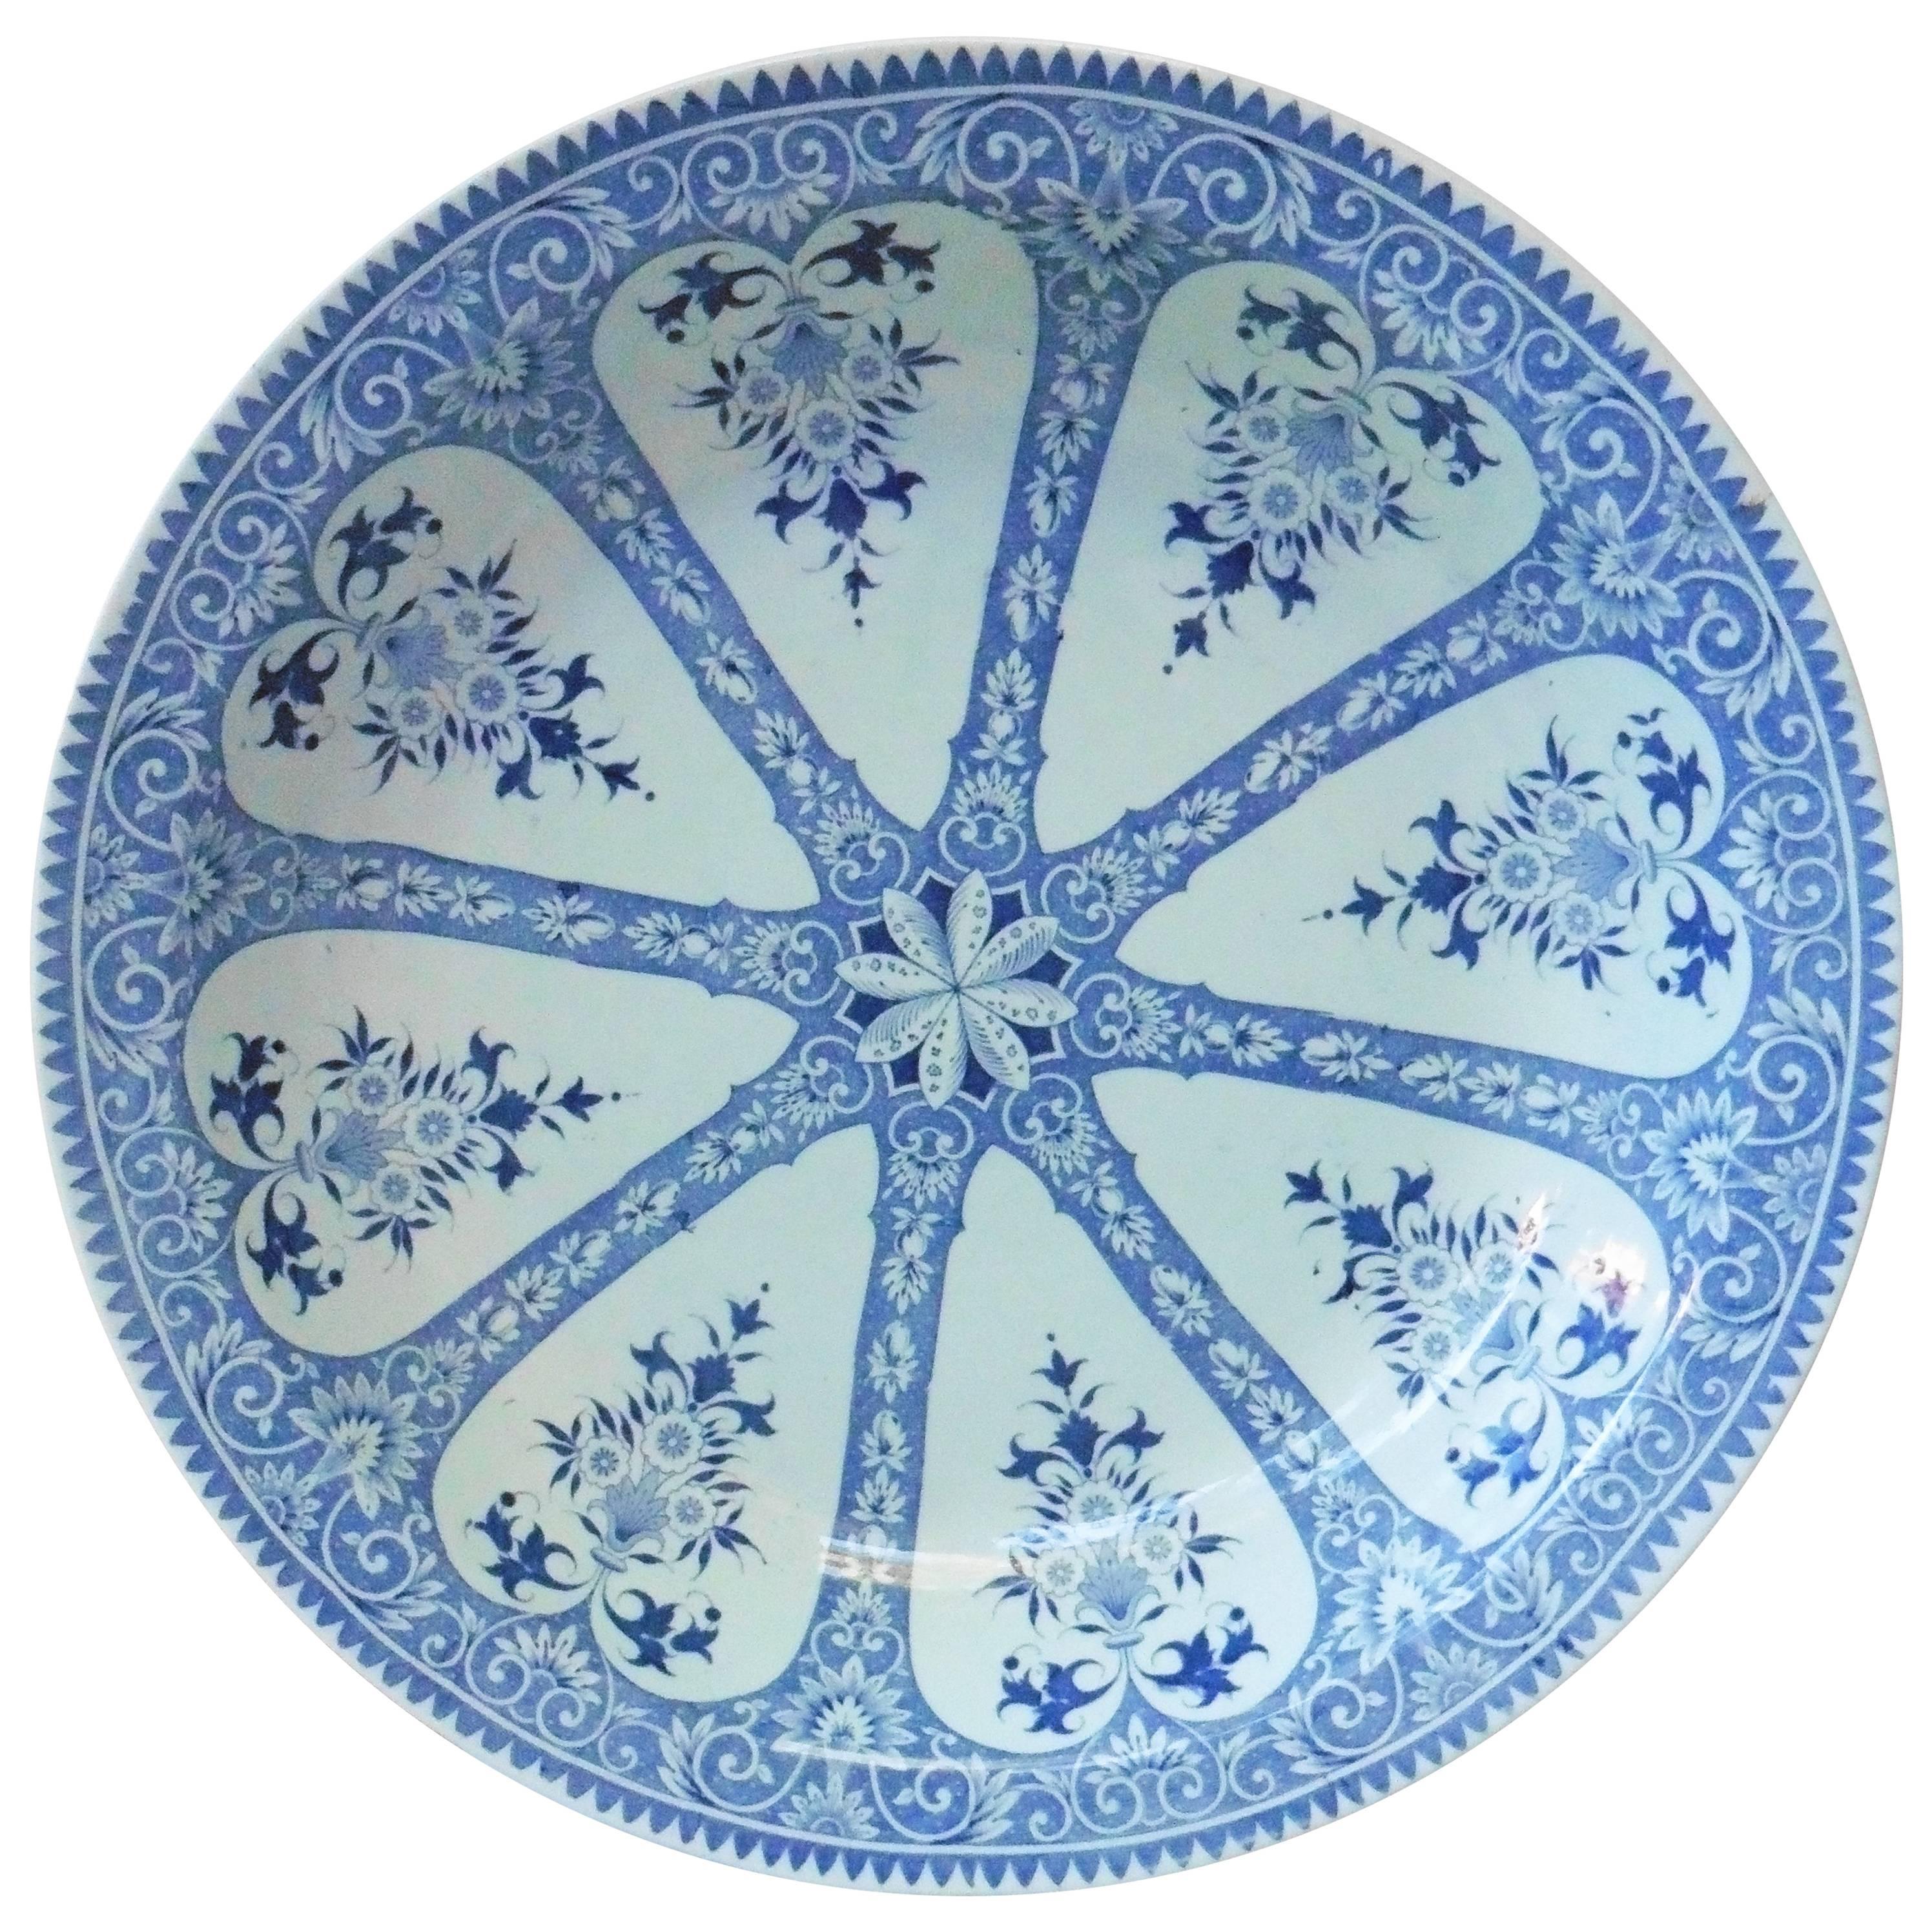 Large French Blue and White Platter Sarreguemines Francois